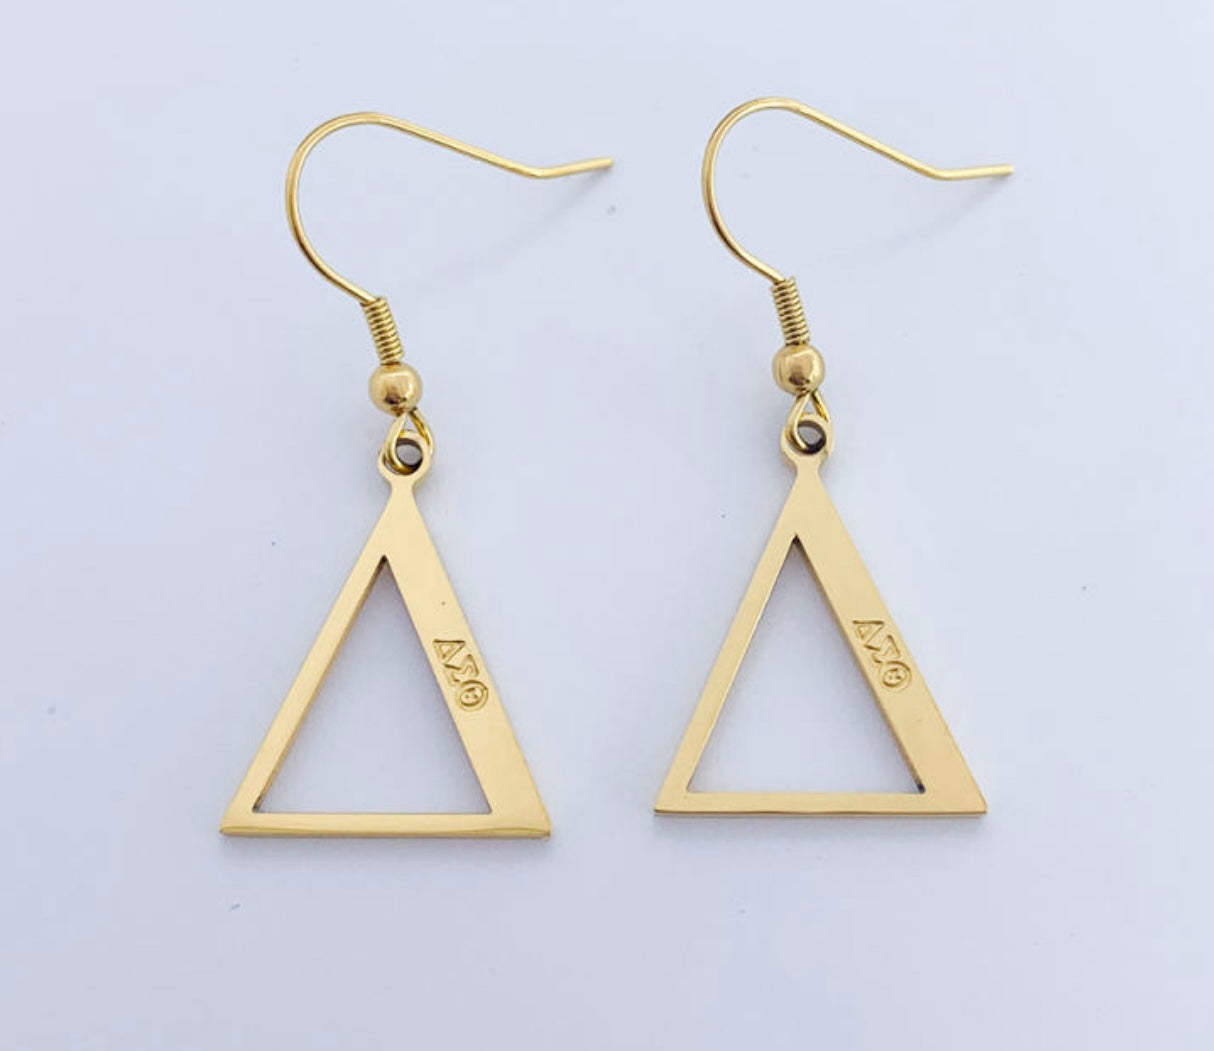 Stainless Steel Geometric Triangle earrings with engraved DST symbols